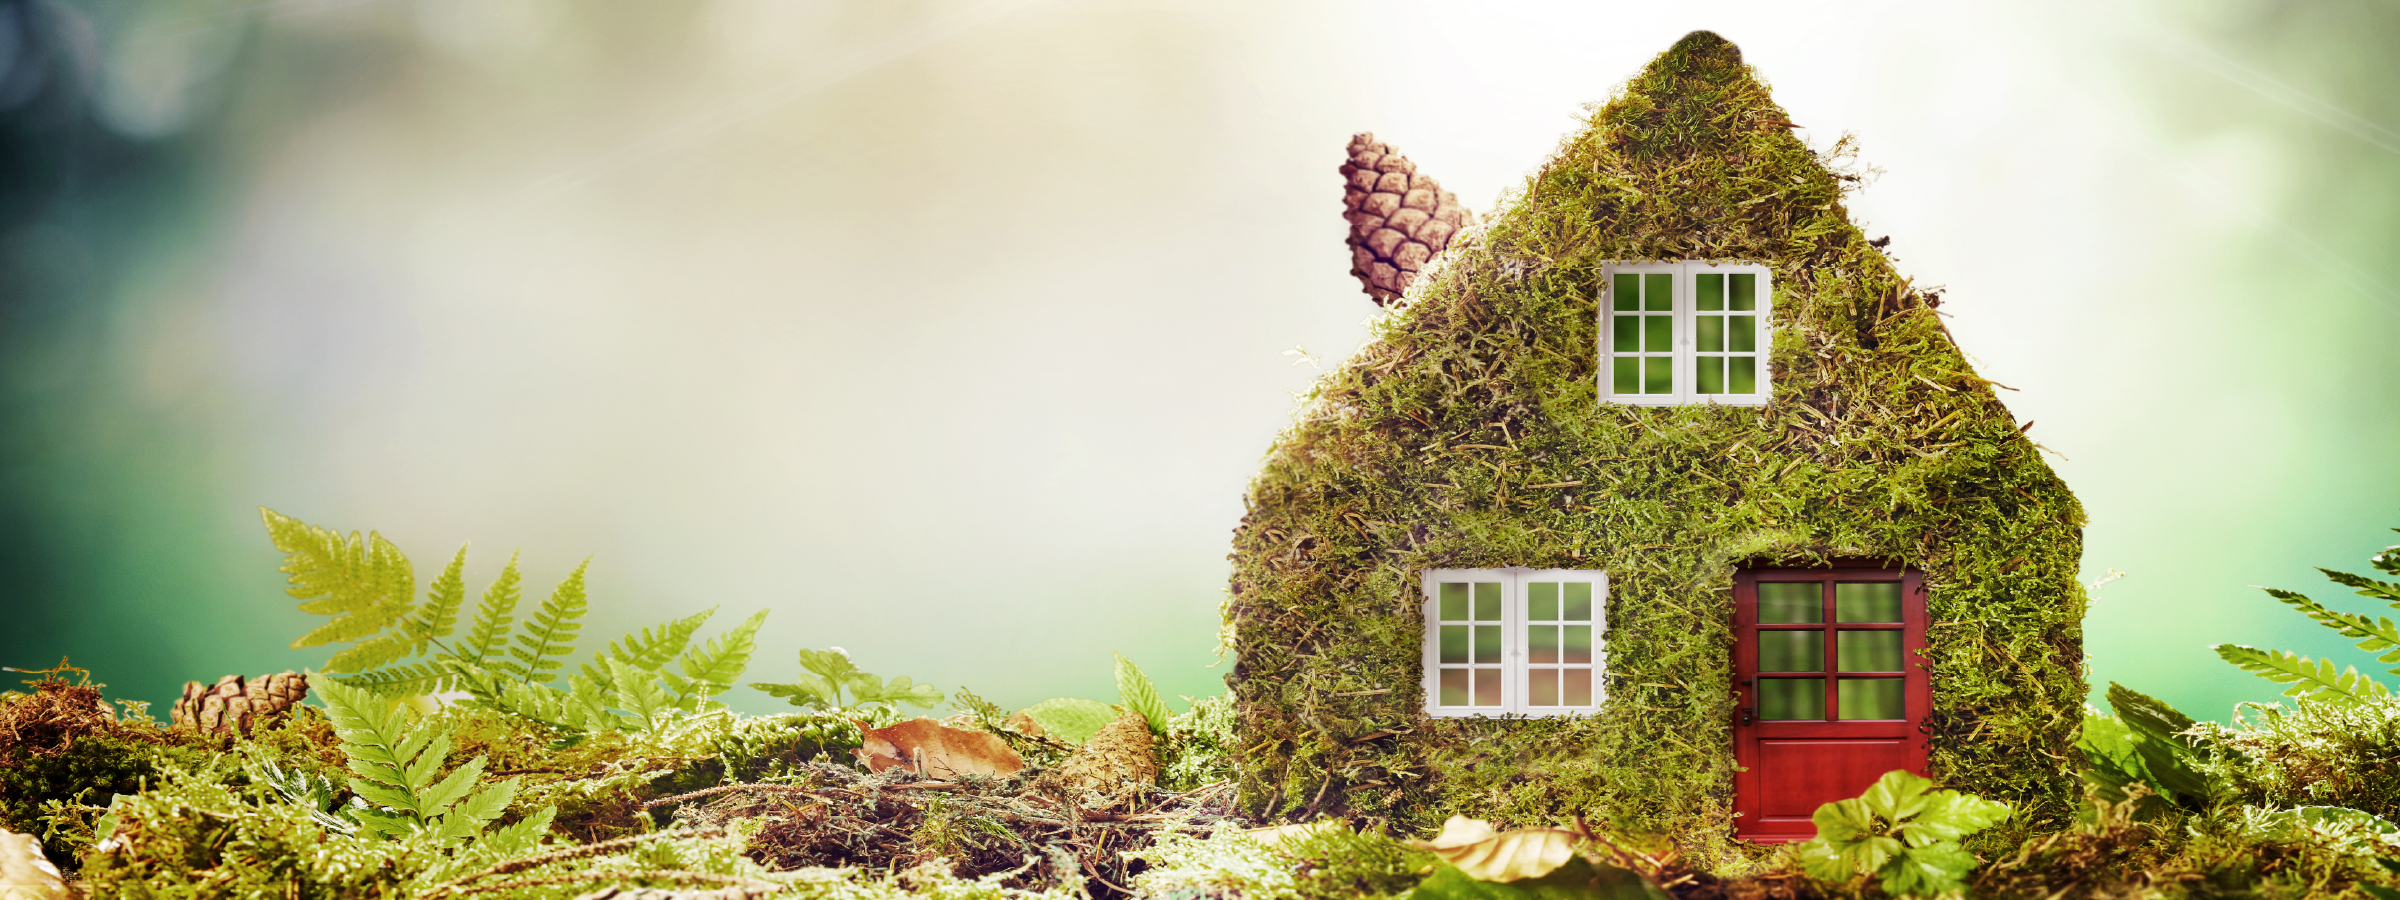 5 Ways to Make Your Home More Eco-Friendly